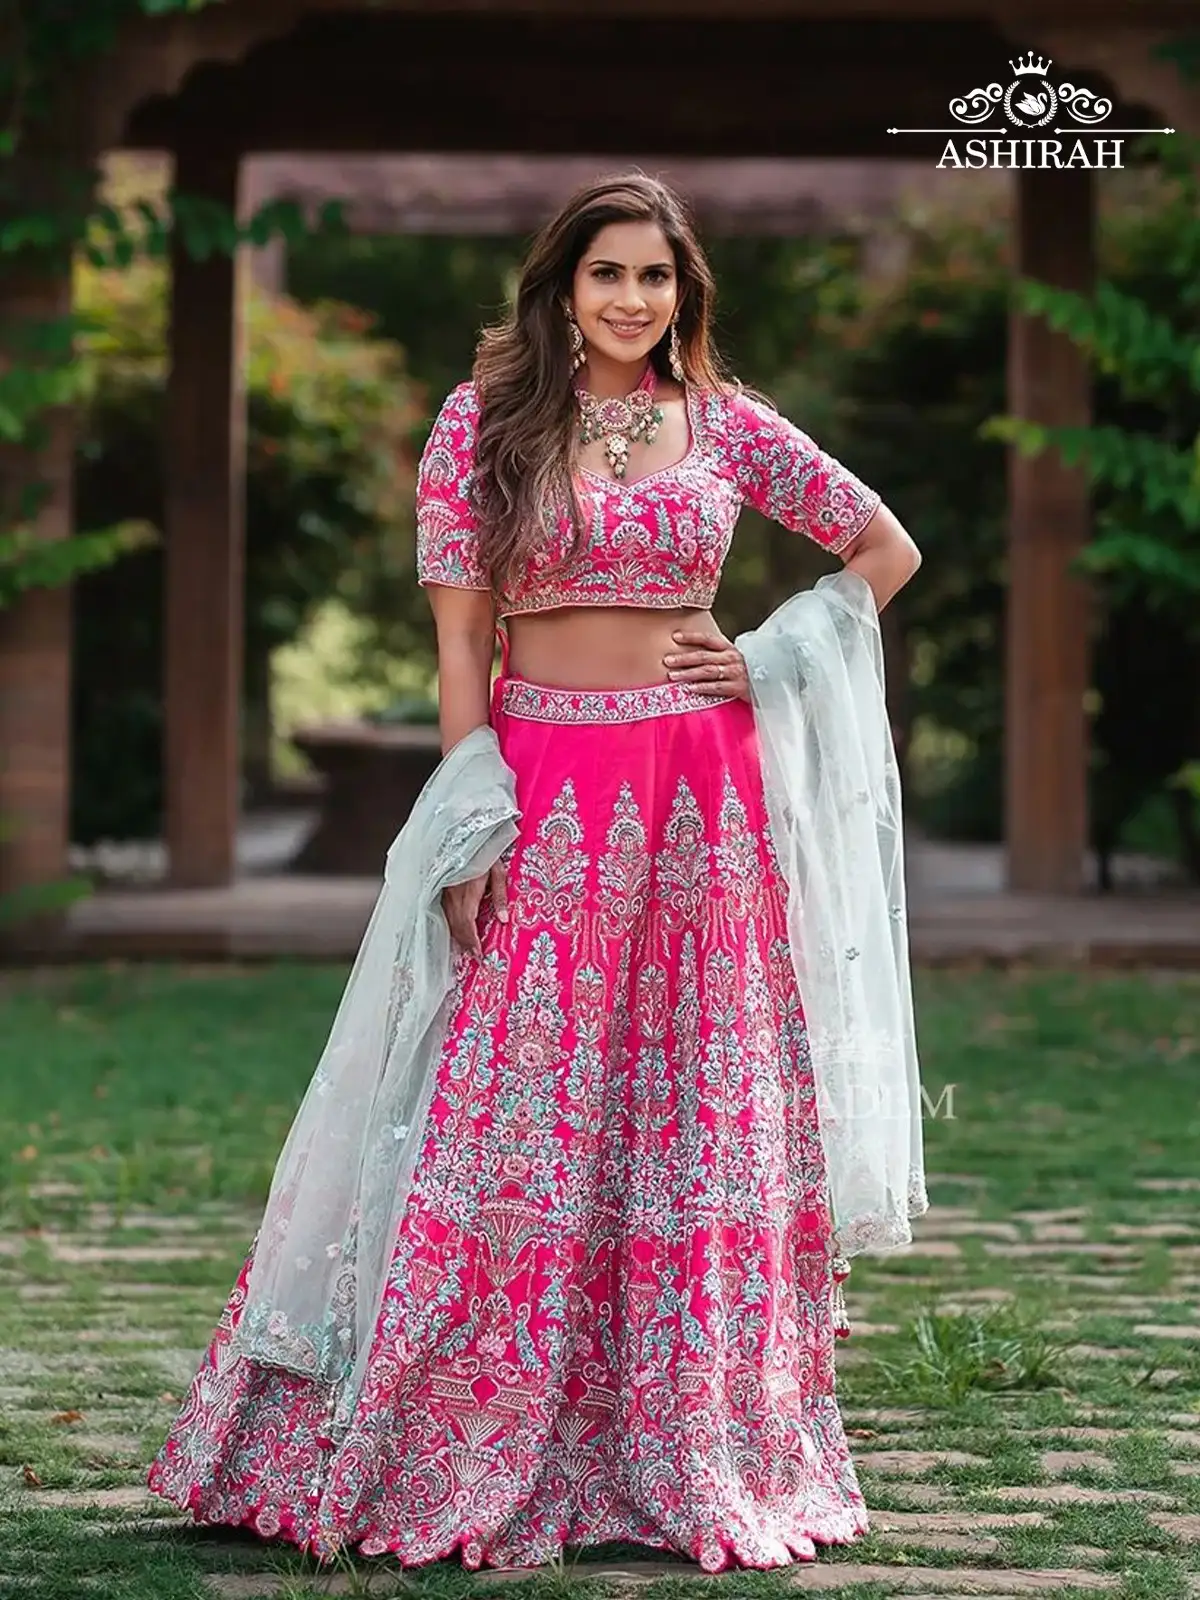 Shop Beautiful Lehengas That Will Make You Lovely, by Diadem store